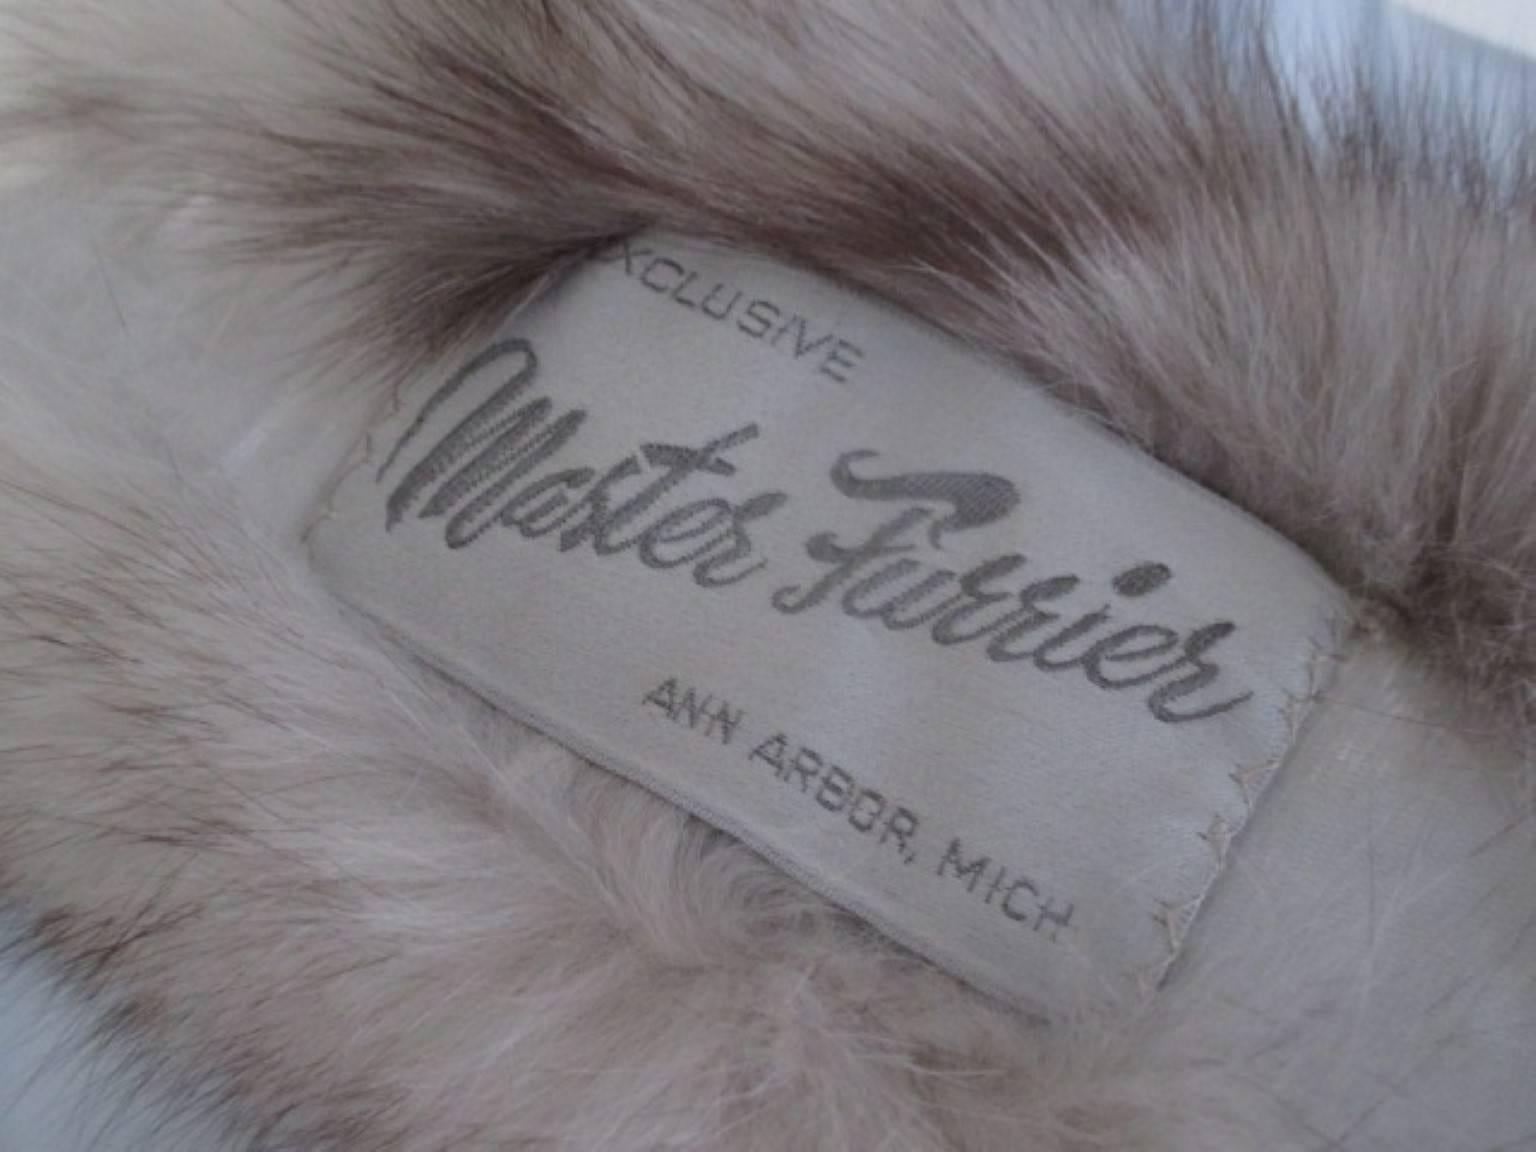 Arctic vintage fox fur stole with 2 fox tails.
The inside is lined with velvet.
From : Exclusive Master furrier, Ann Arbor, Michigan.
Please note that vintage items are not new and therefore might have minor imperfections. 
